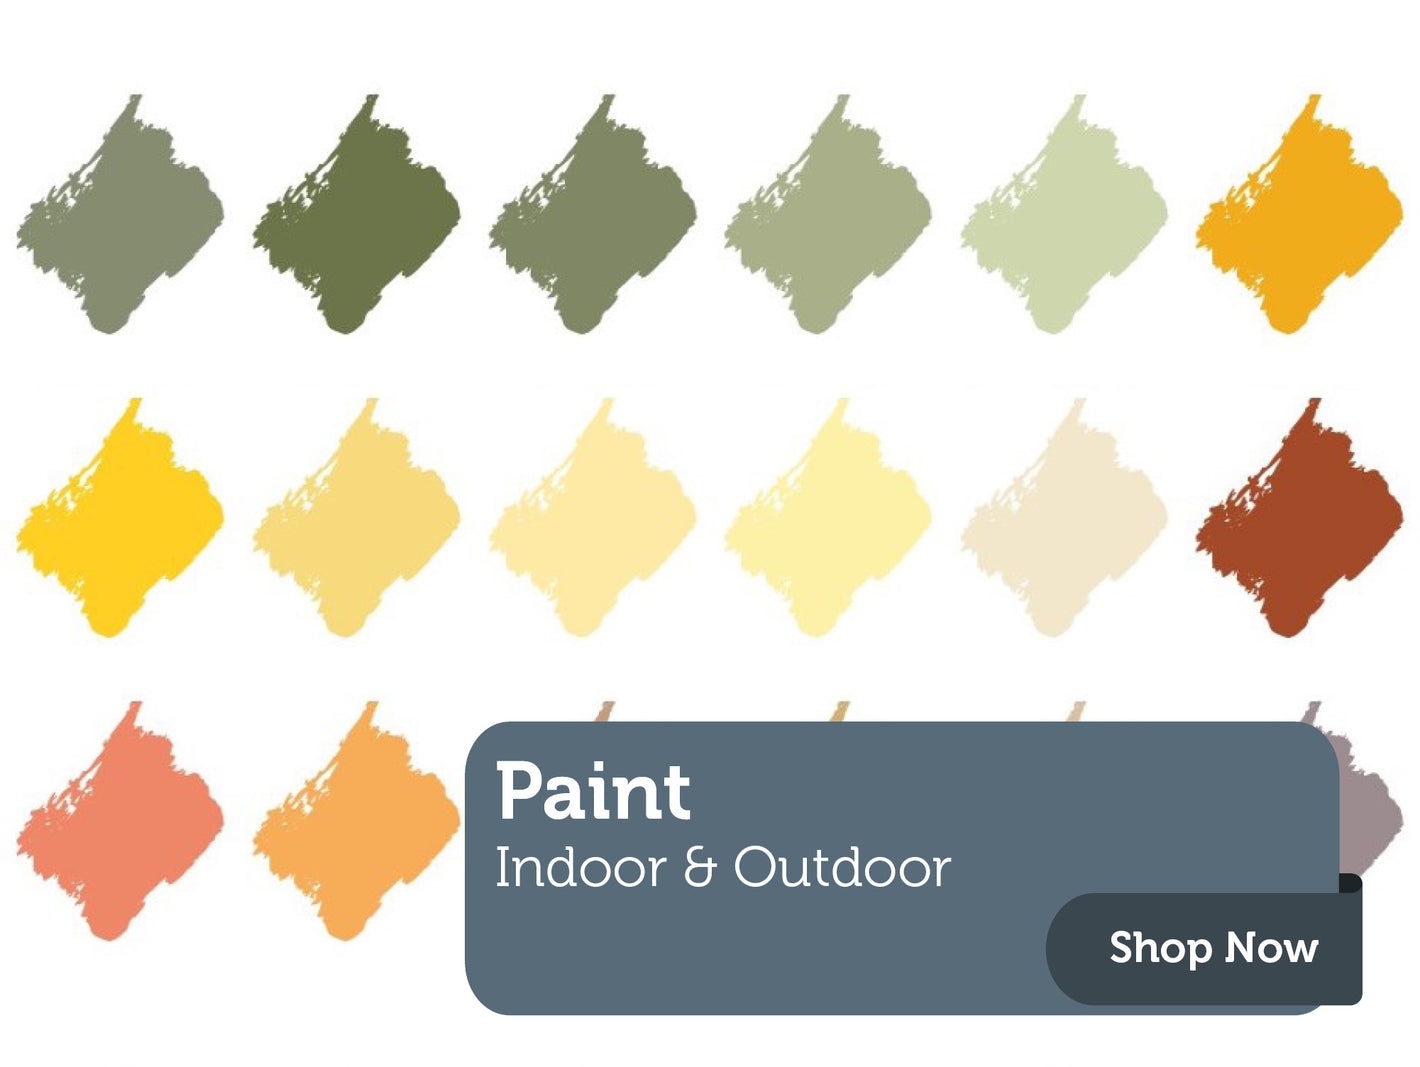 The Paint Collection at Fitzgeralds Homevalue in Dingle